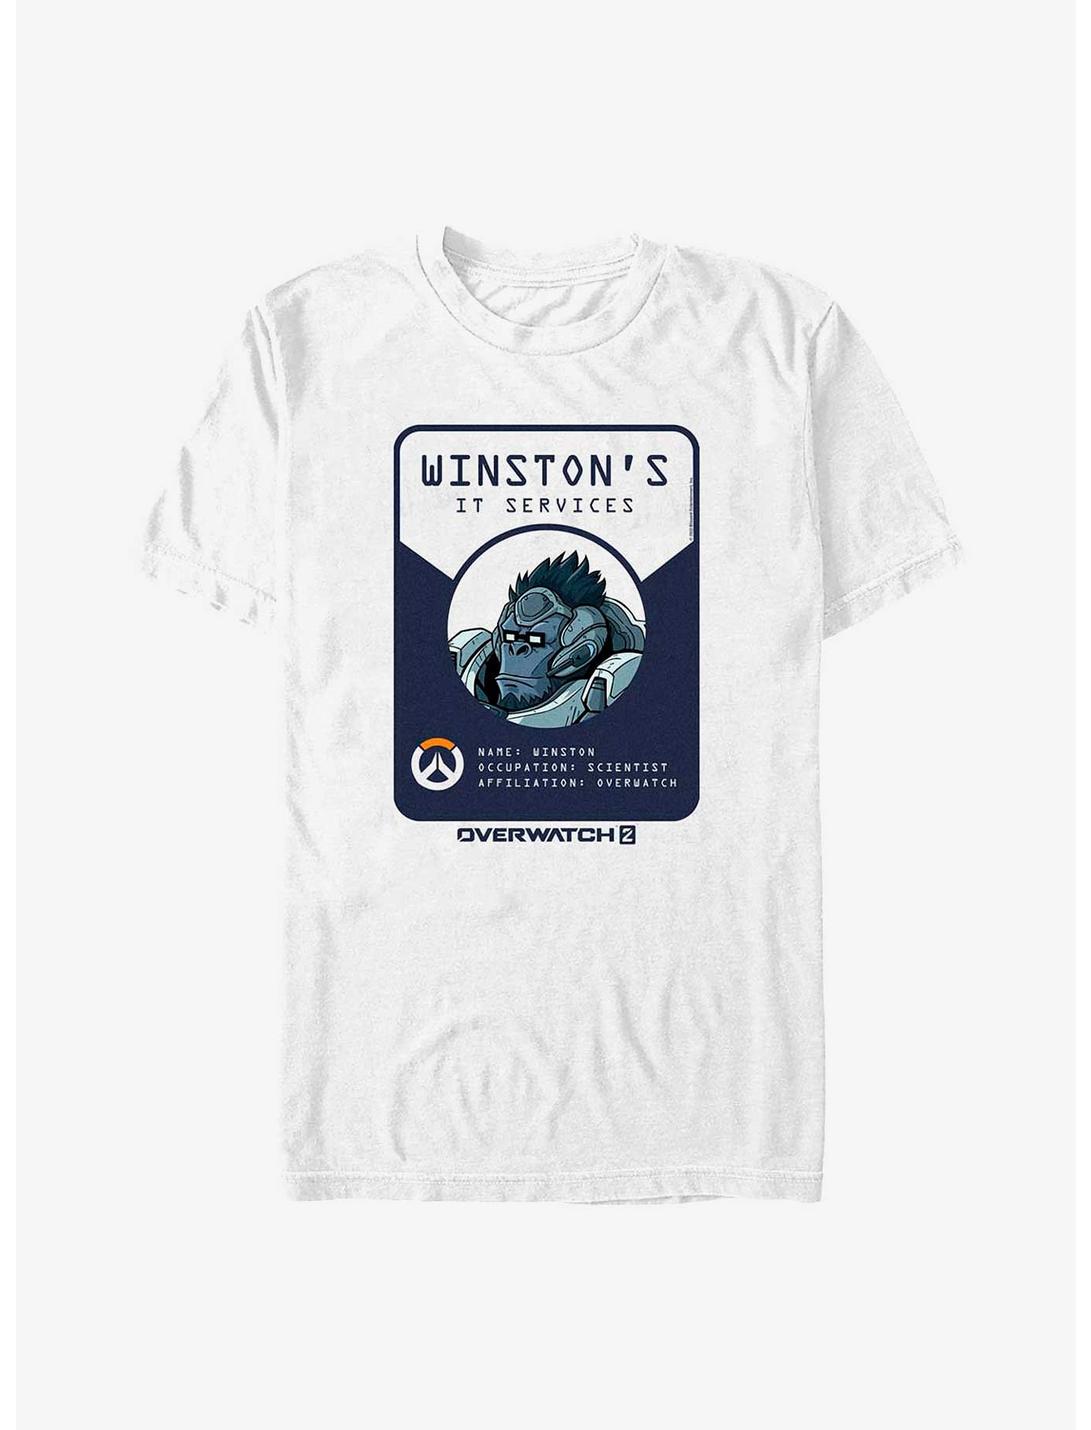 Overwatch 2 Winston's IT Services T-Shirt, WHITE, hi-res